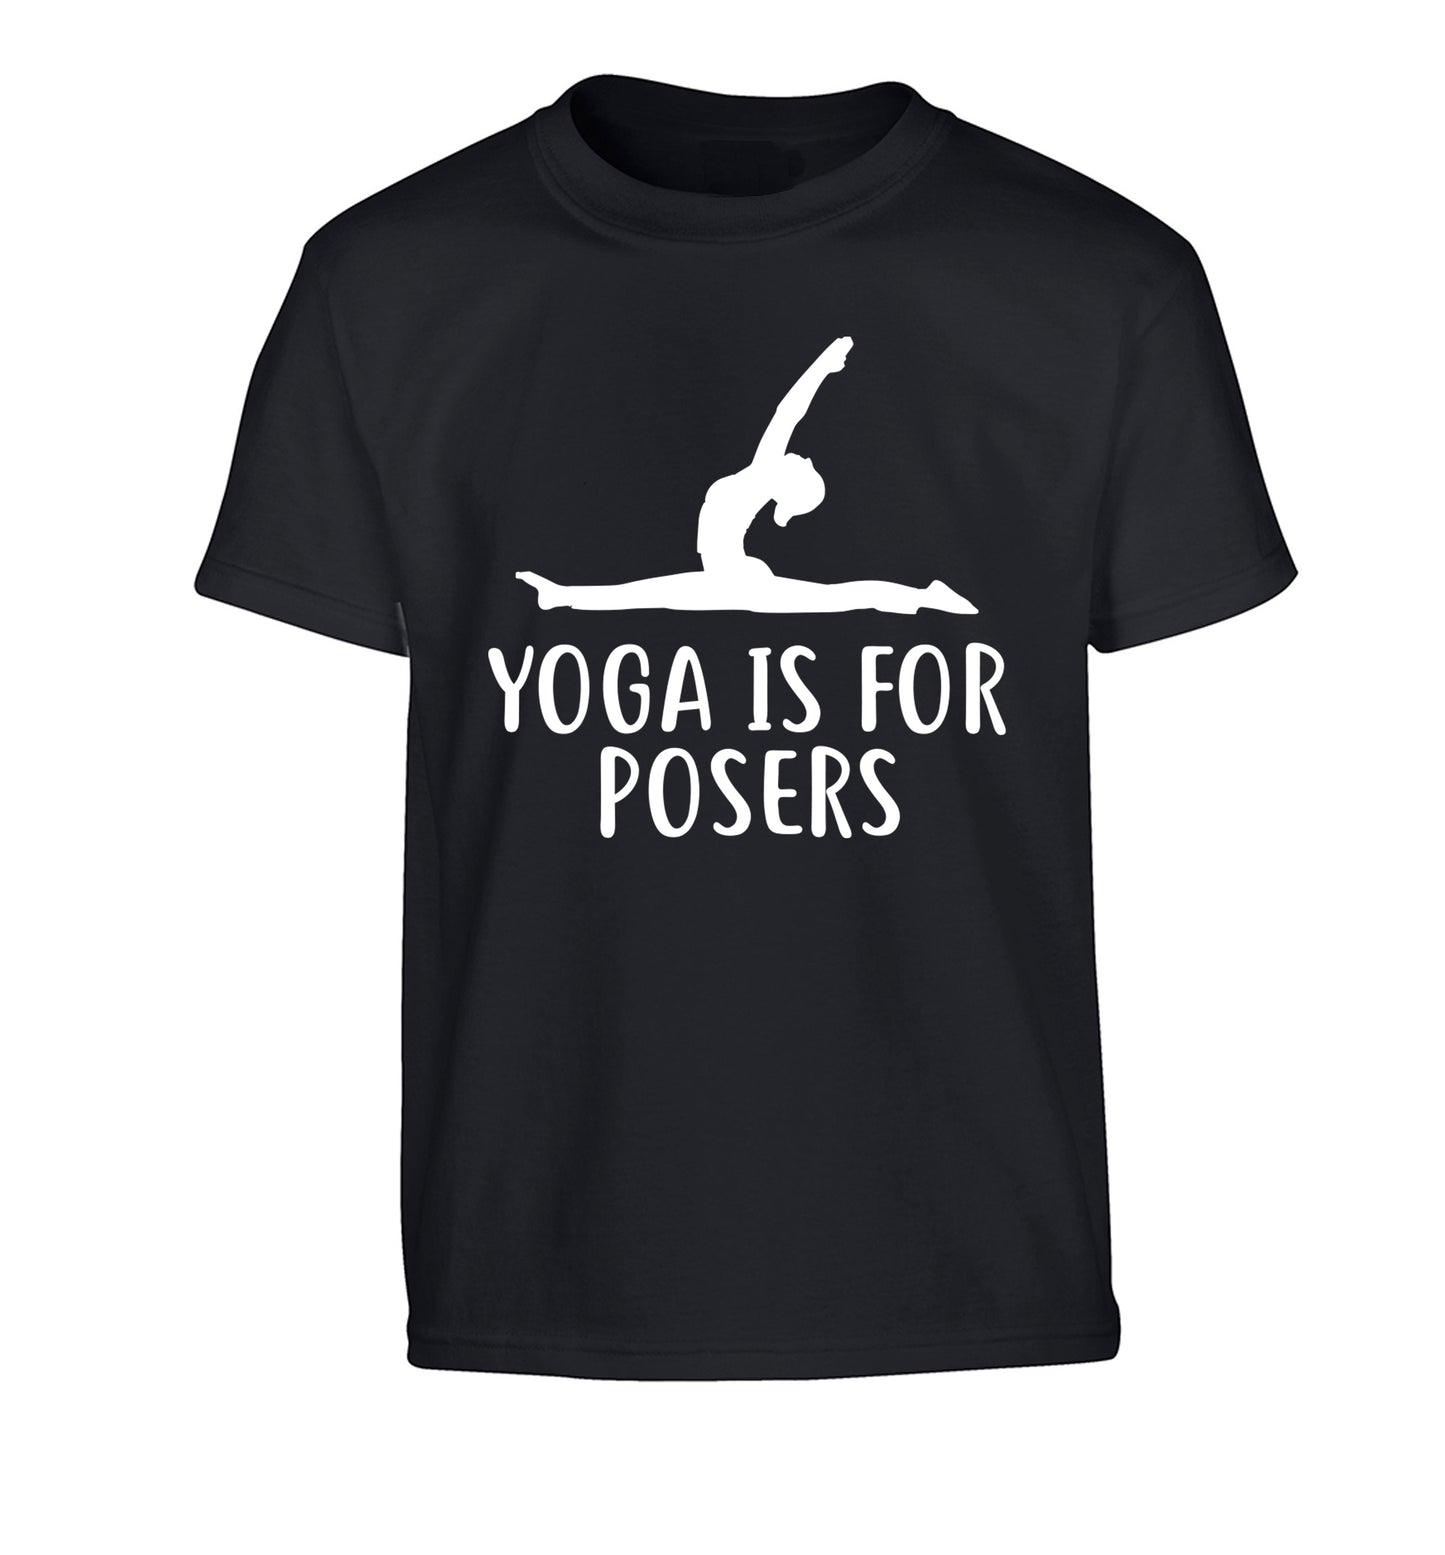 Yoga is for posers Children's black Tshirt 12-13 Years